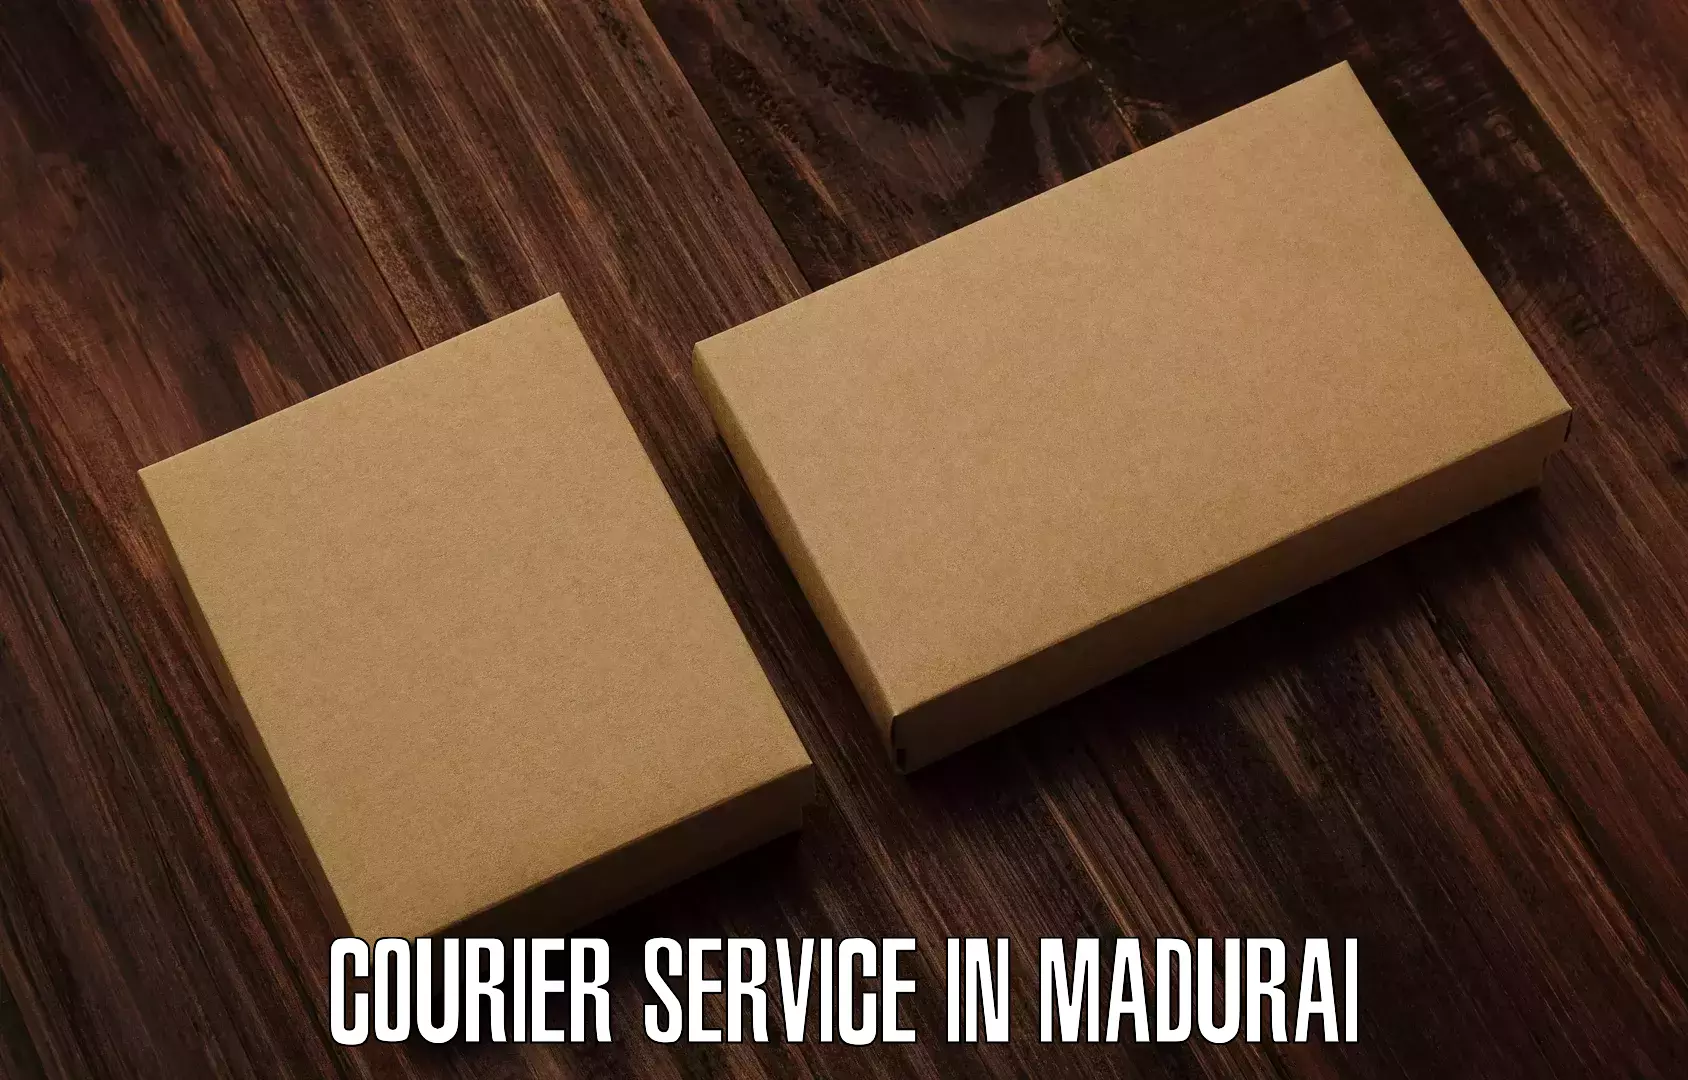 Fast shipping solutions in Madurai